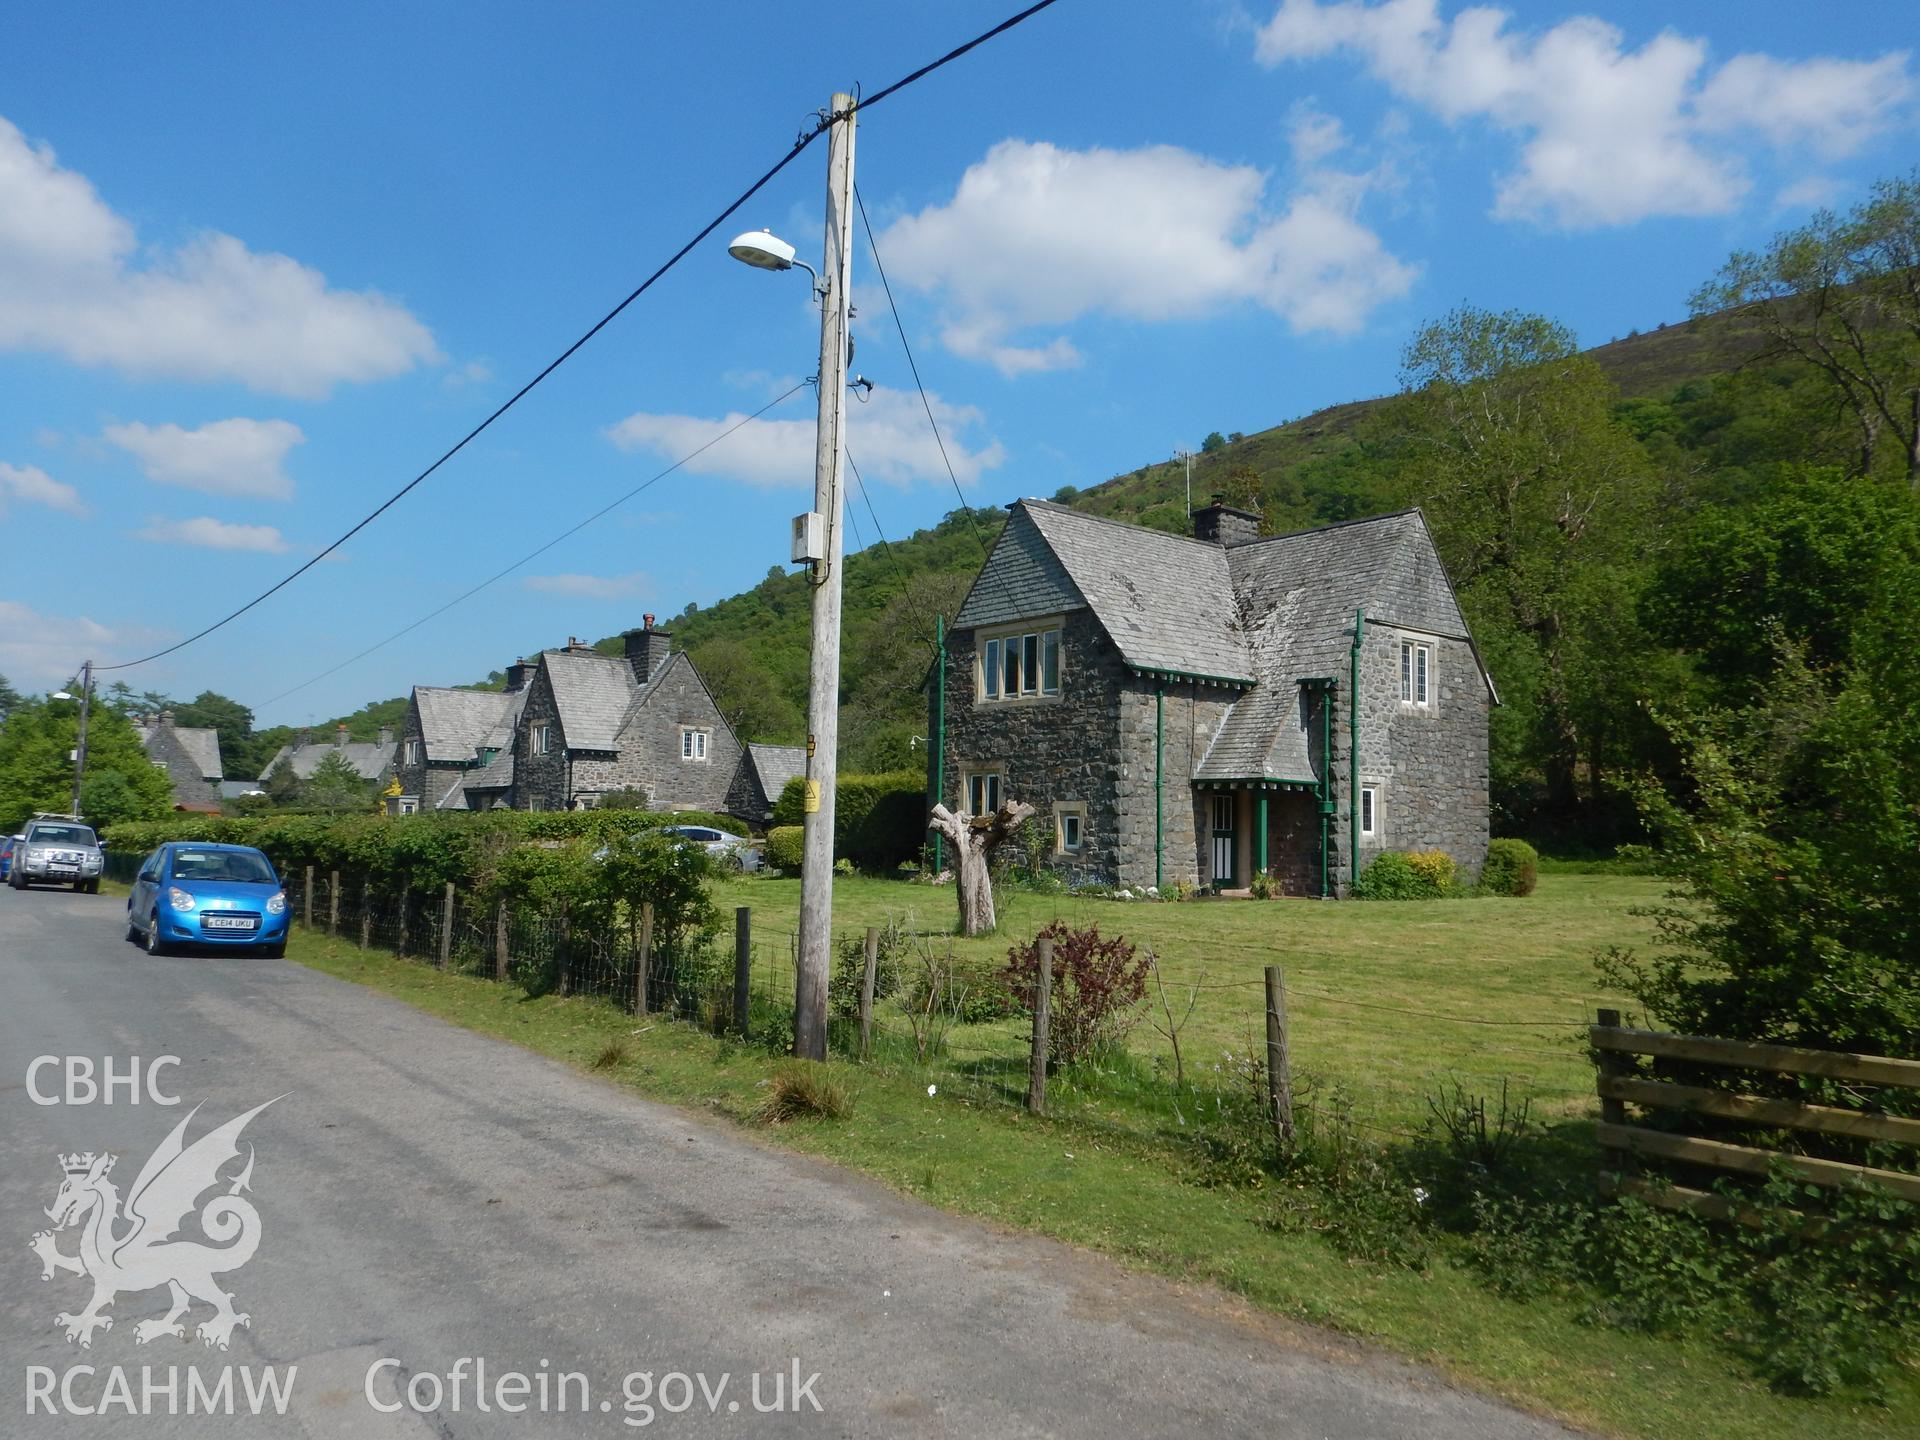 Houses in Arts and Crafts style in Elan Village, looking north-east. Photographed as part of Archaeological Desk Based Assessment of Afon Claerwen, Elan Valley, Rhayader, Powys. Assessment by Archaeology Wales in 2018. Report no. 1681. Project no. 2573.